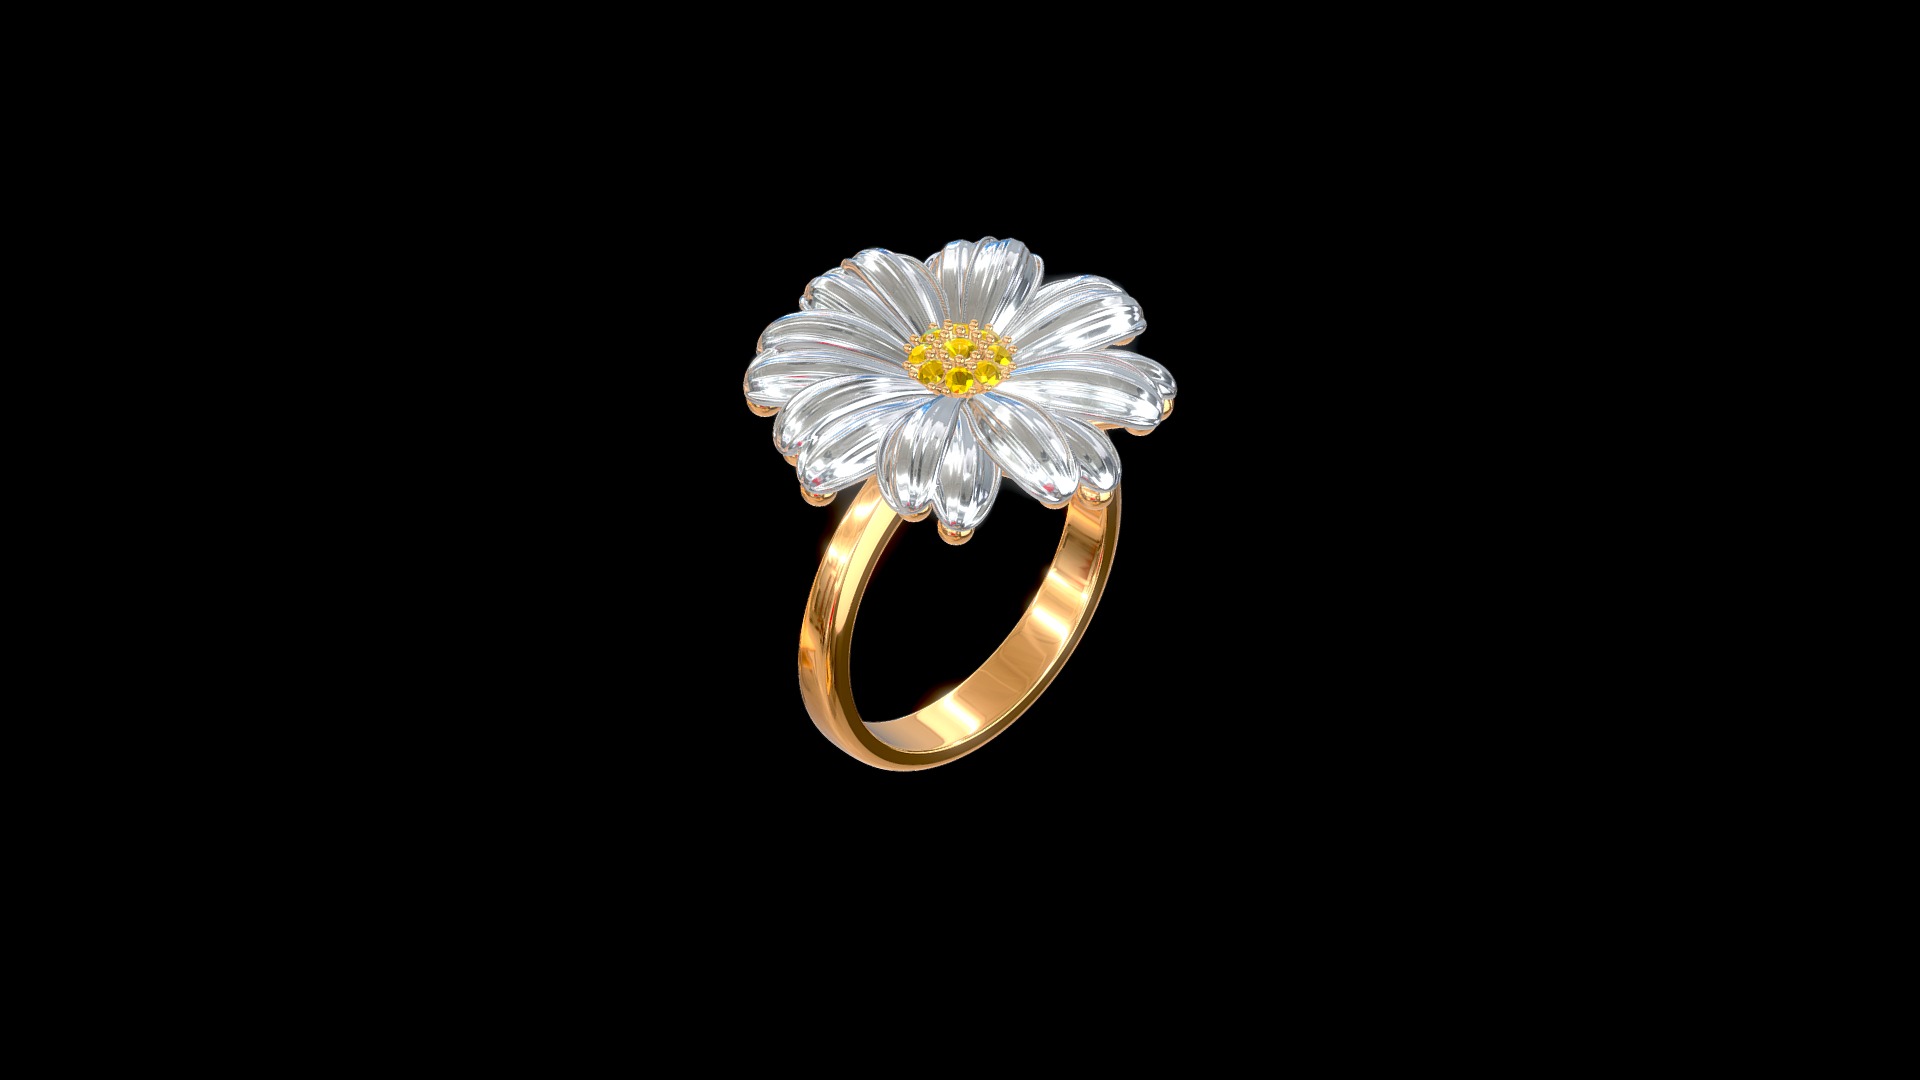 3D model BELLIS - This is a 3D model of the BELLIS. The 3D model is about a white flower in a gold ring.